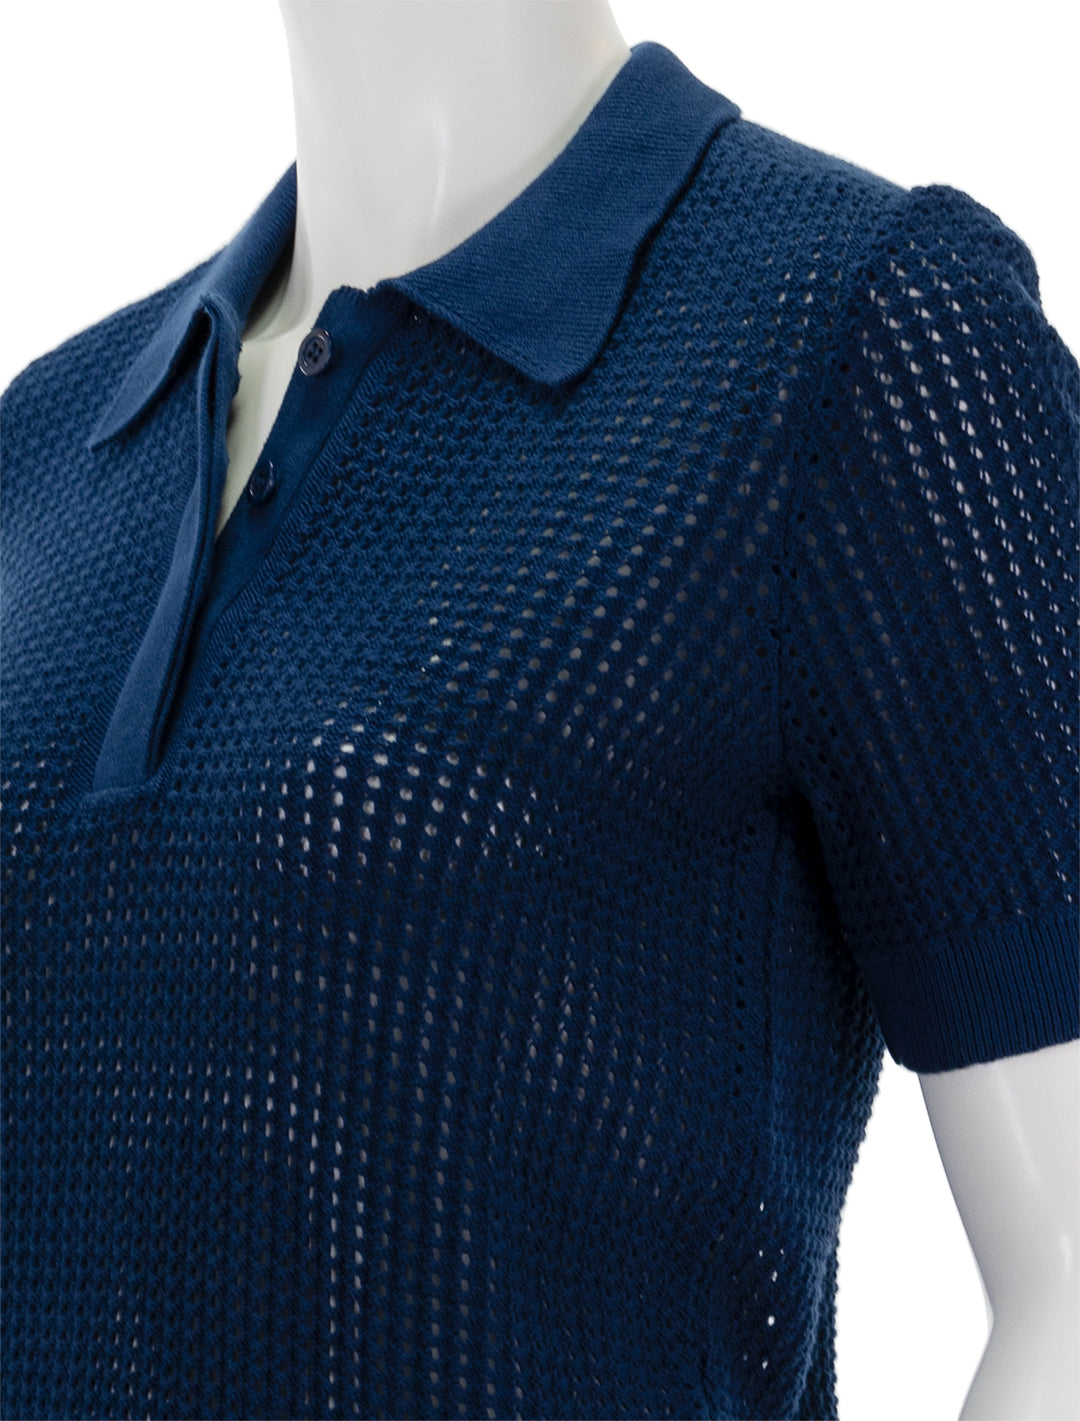 Close-up view of Clare V.'s augustine polo in cobalt.